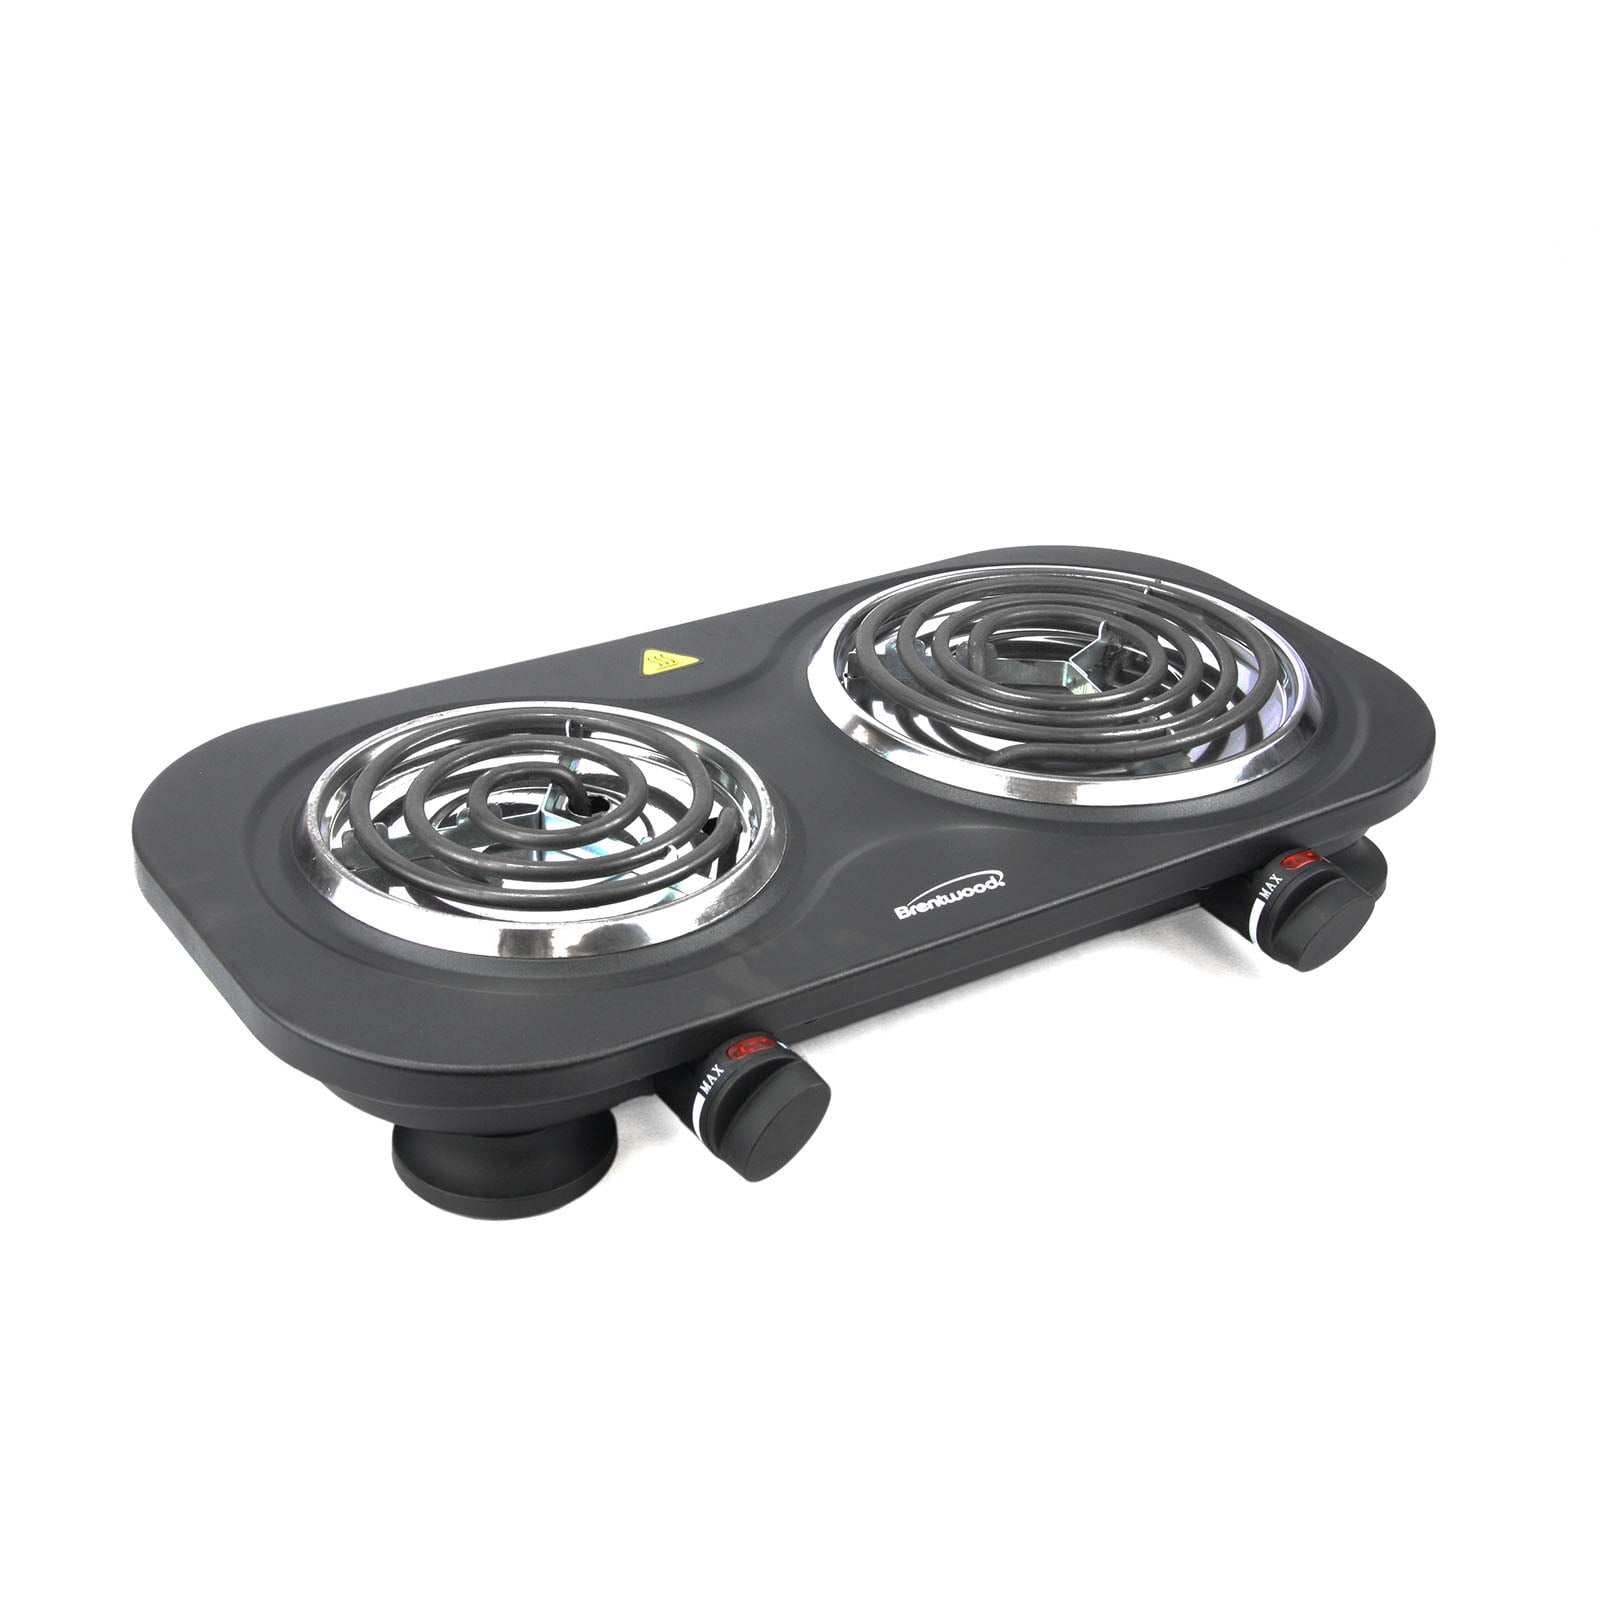 Brentwood Electric 1500W Double Burner Spiral White